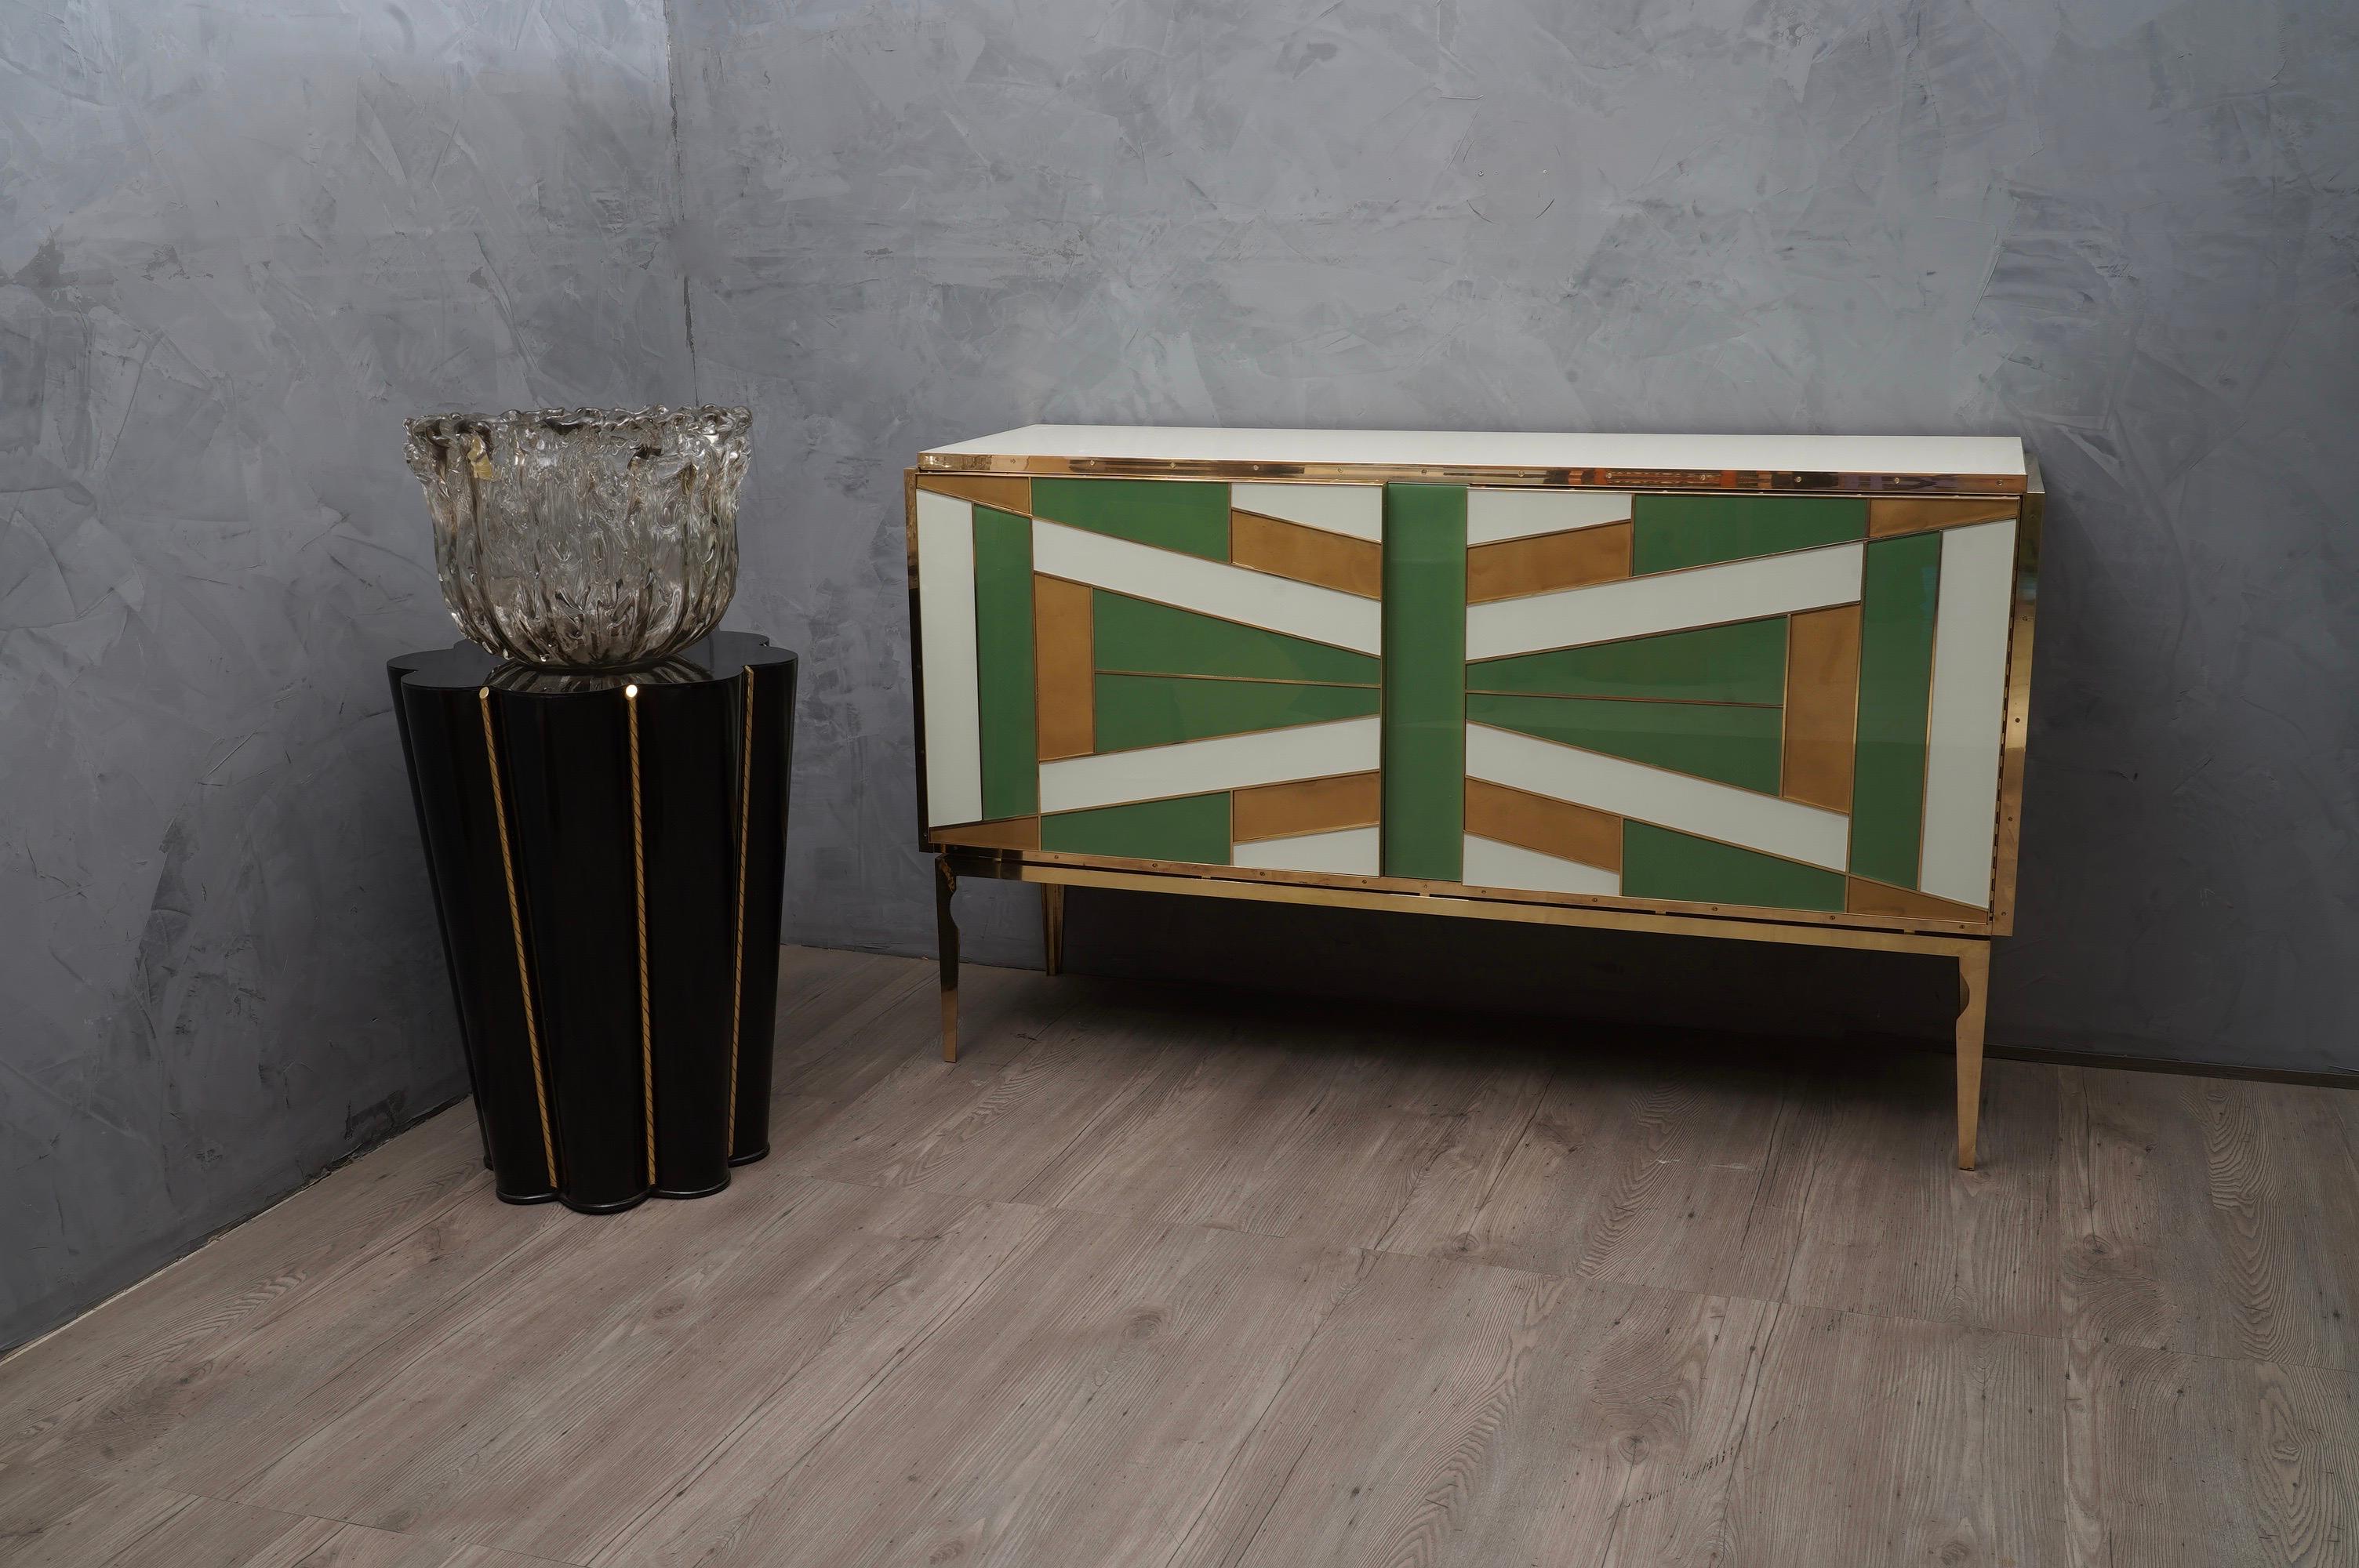 Very special multi-color glass sideboard beautifully matched with green gold and light ivory.

The sideboards have a wooden structure, externally they have been plated with glass of different colors and then edged with polished brass finishes. Brass